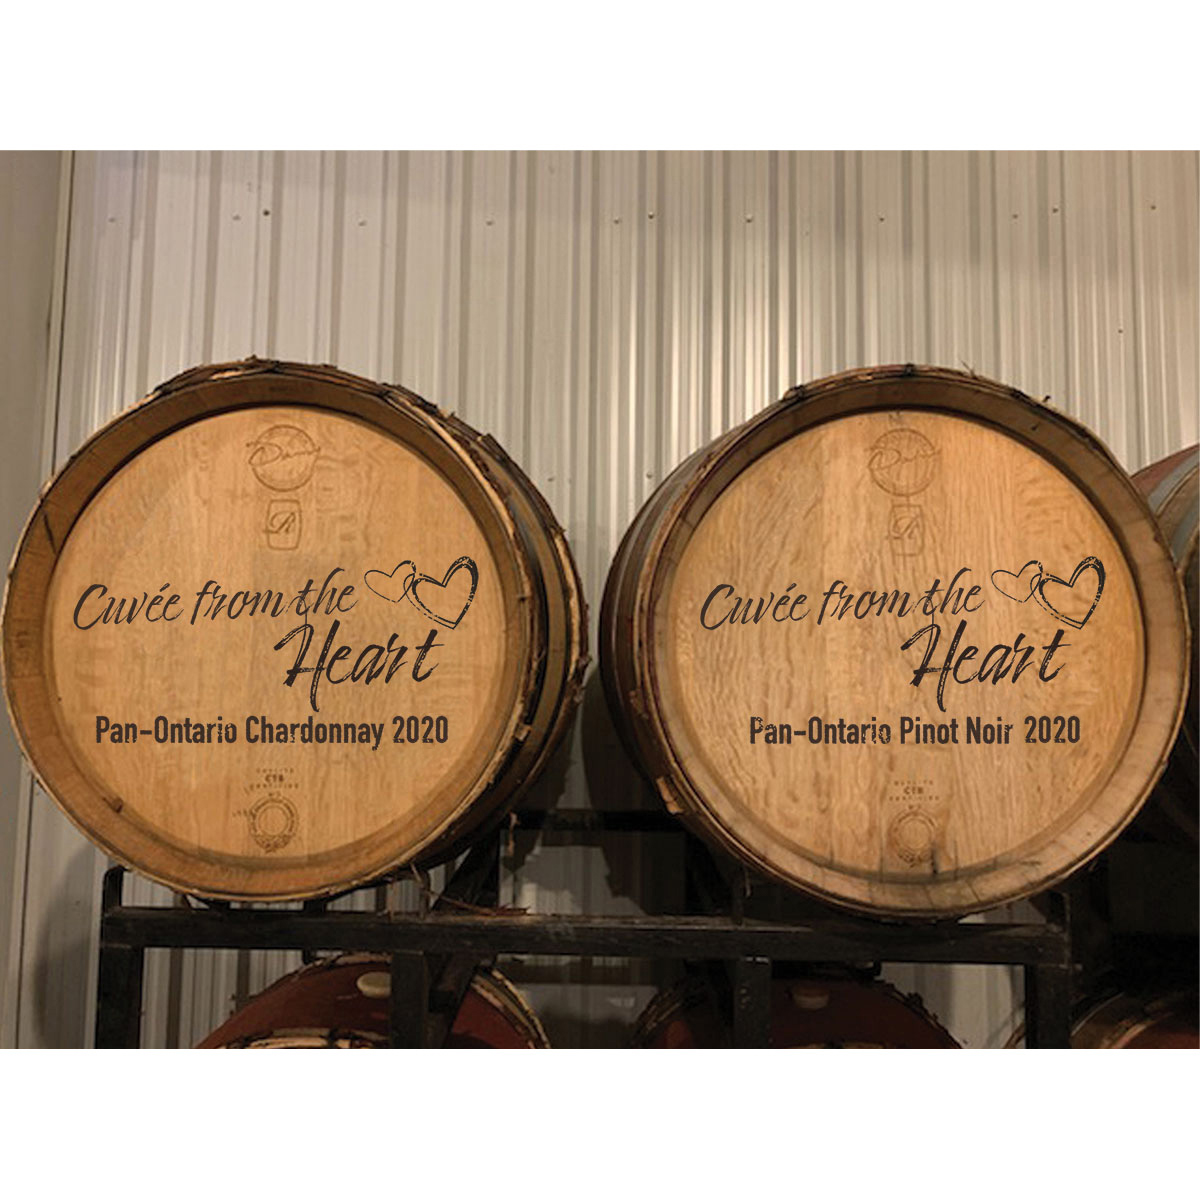 FROM THE HEART BC CUVÉE # 1 CHARDONNAY 2020 (1)
FROM THE HEART BC CUVÉE # 1 RED 2020 (1)
FROM THE HEART ONTARIO CUVÉE # 1 CHARDONNAY 2019 (1)
FROM THE HEART ONTARIO CUVÉE # 1 PINOT NOIR 2019 (1)
FROM THE HEART ONTARIO CUVÉE # 2 CHARDONNAY 2020 (1)
FROM THE HEART ONTARIO CUVÉE # 2 PINOT NOIR 2020 (1)